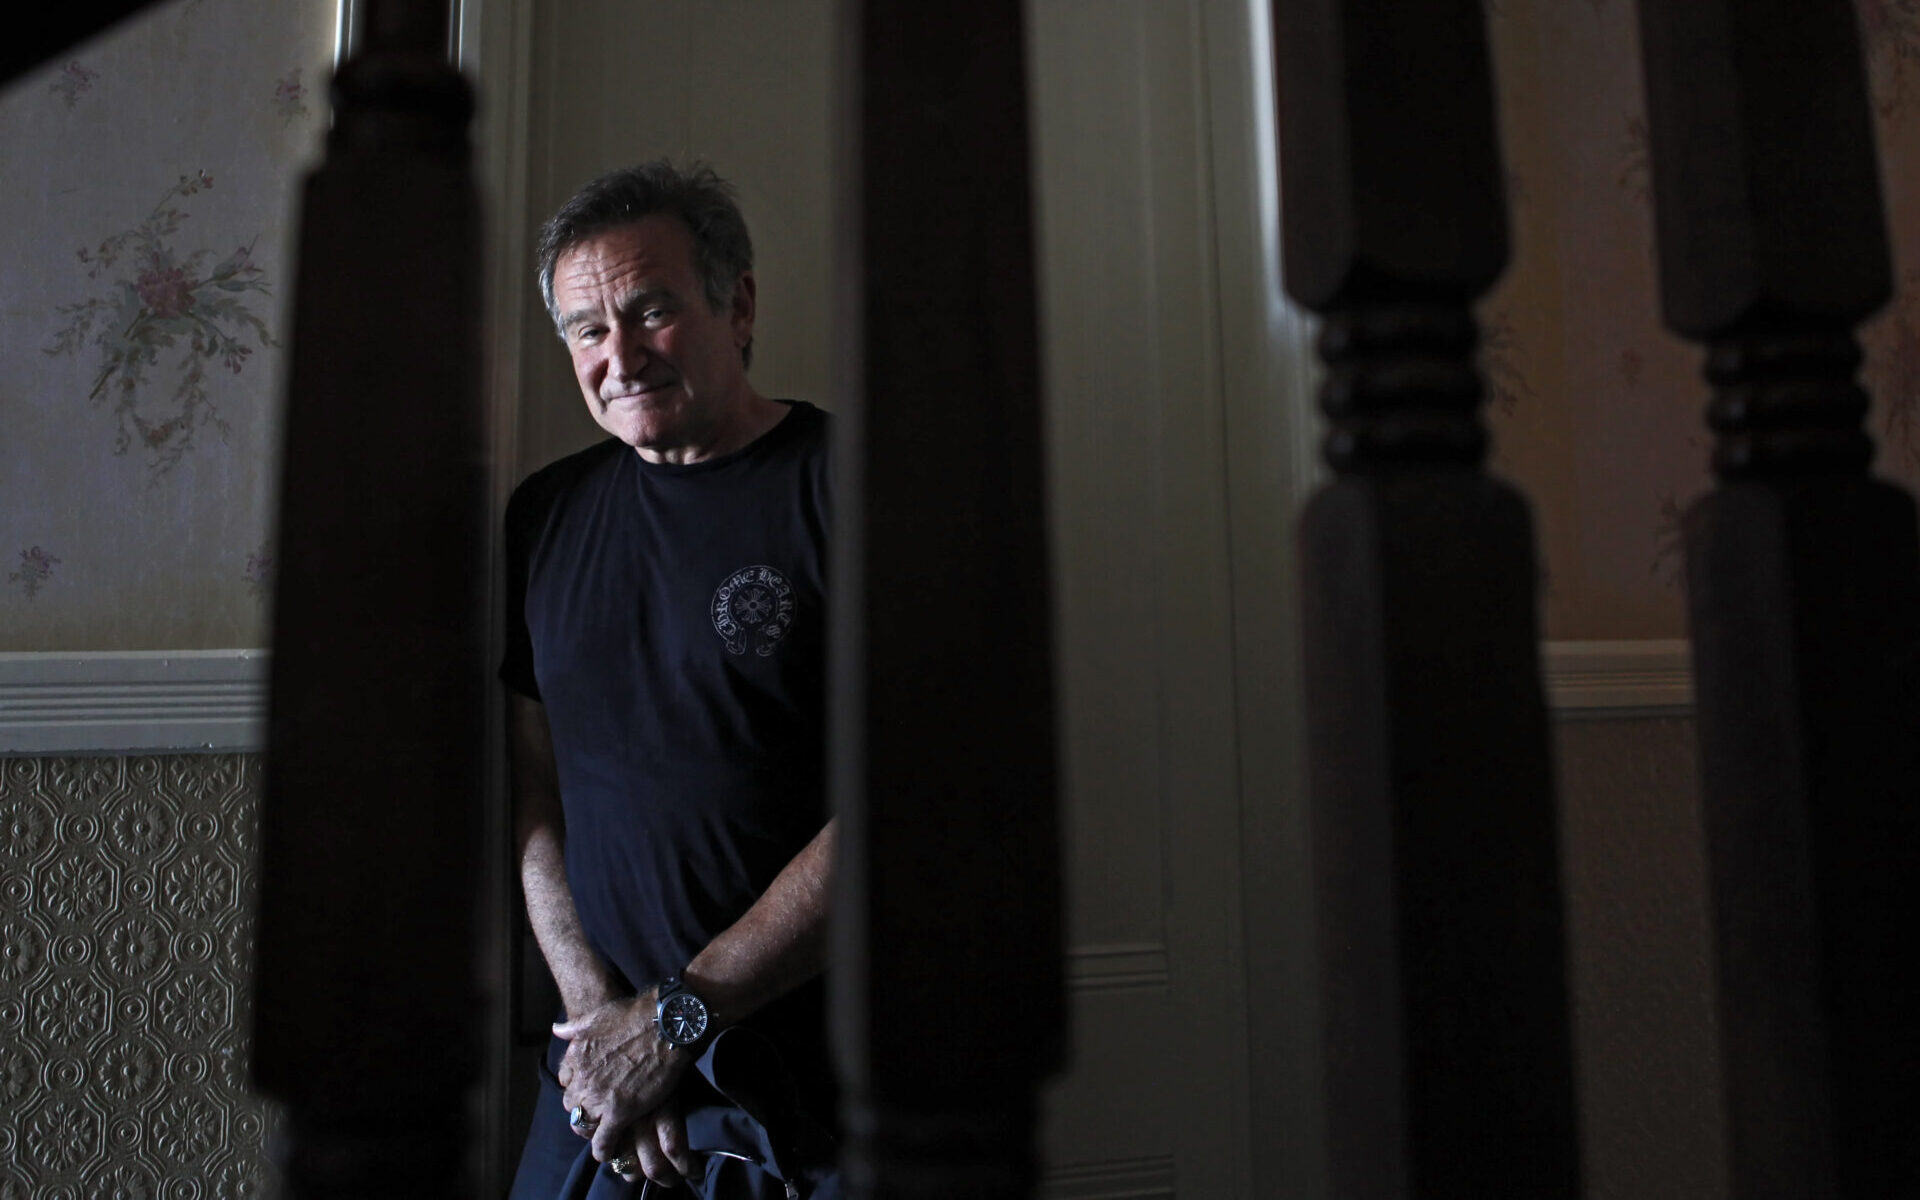 Robin Williams for a feature on their new movie "World's Greatest Dad." (Photo by Carlos Avila Gonzalez/The San Francisco Chronicle via Getty Images)